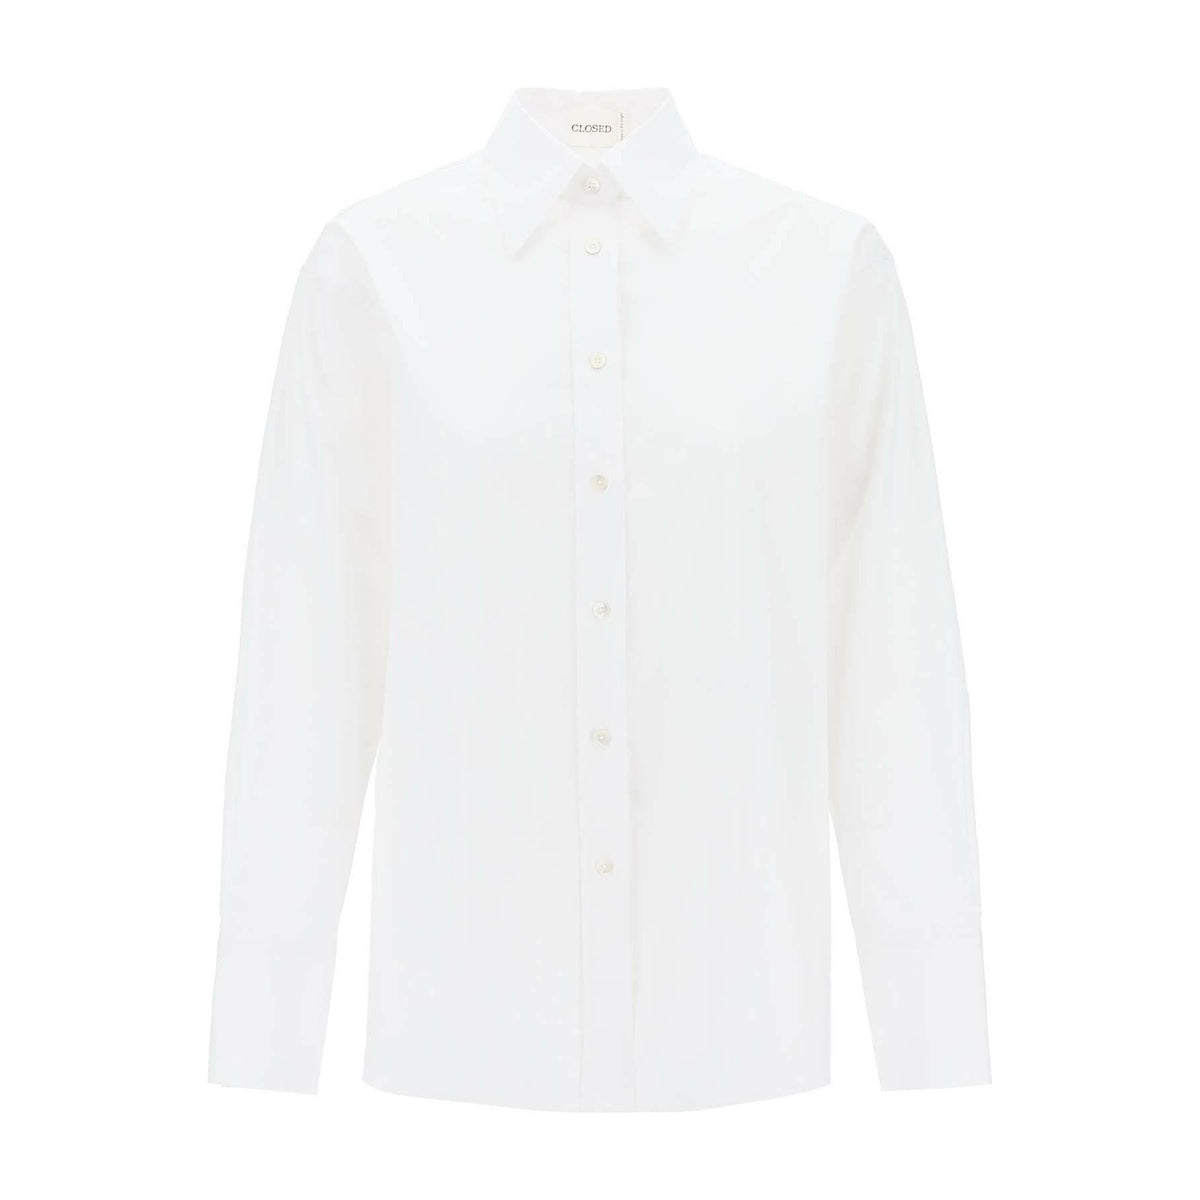 CLOSED - Relaxed Fit Shirt with Open Back Detail - JOHN JULIA